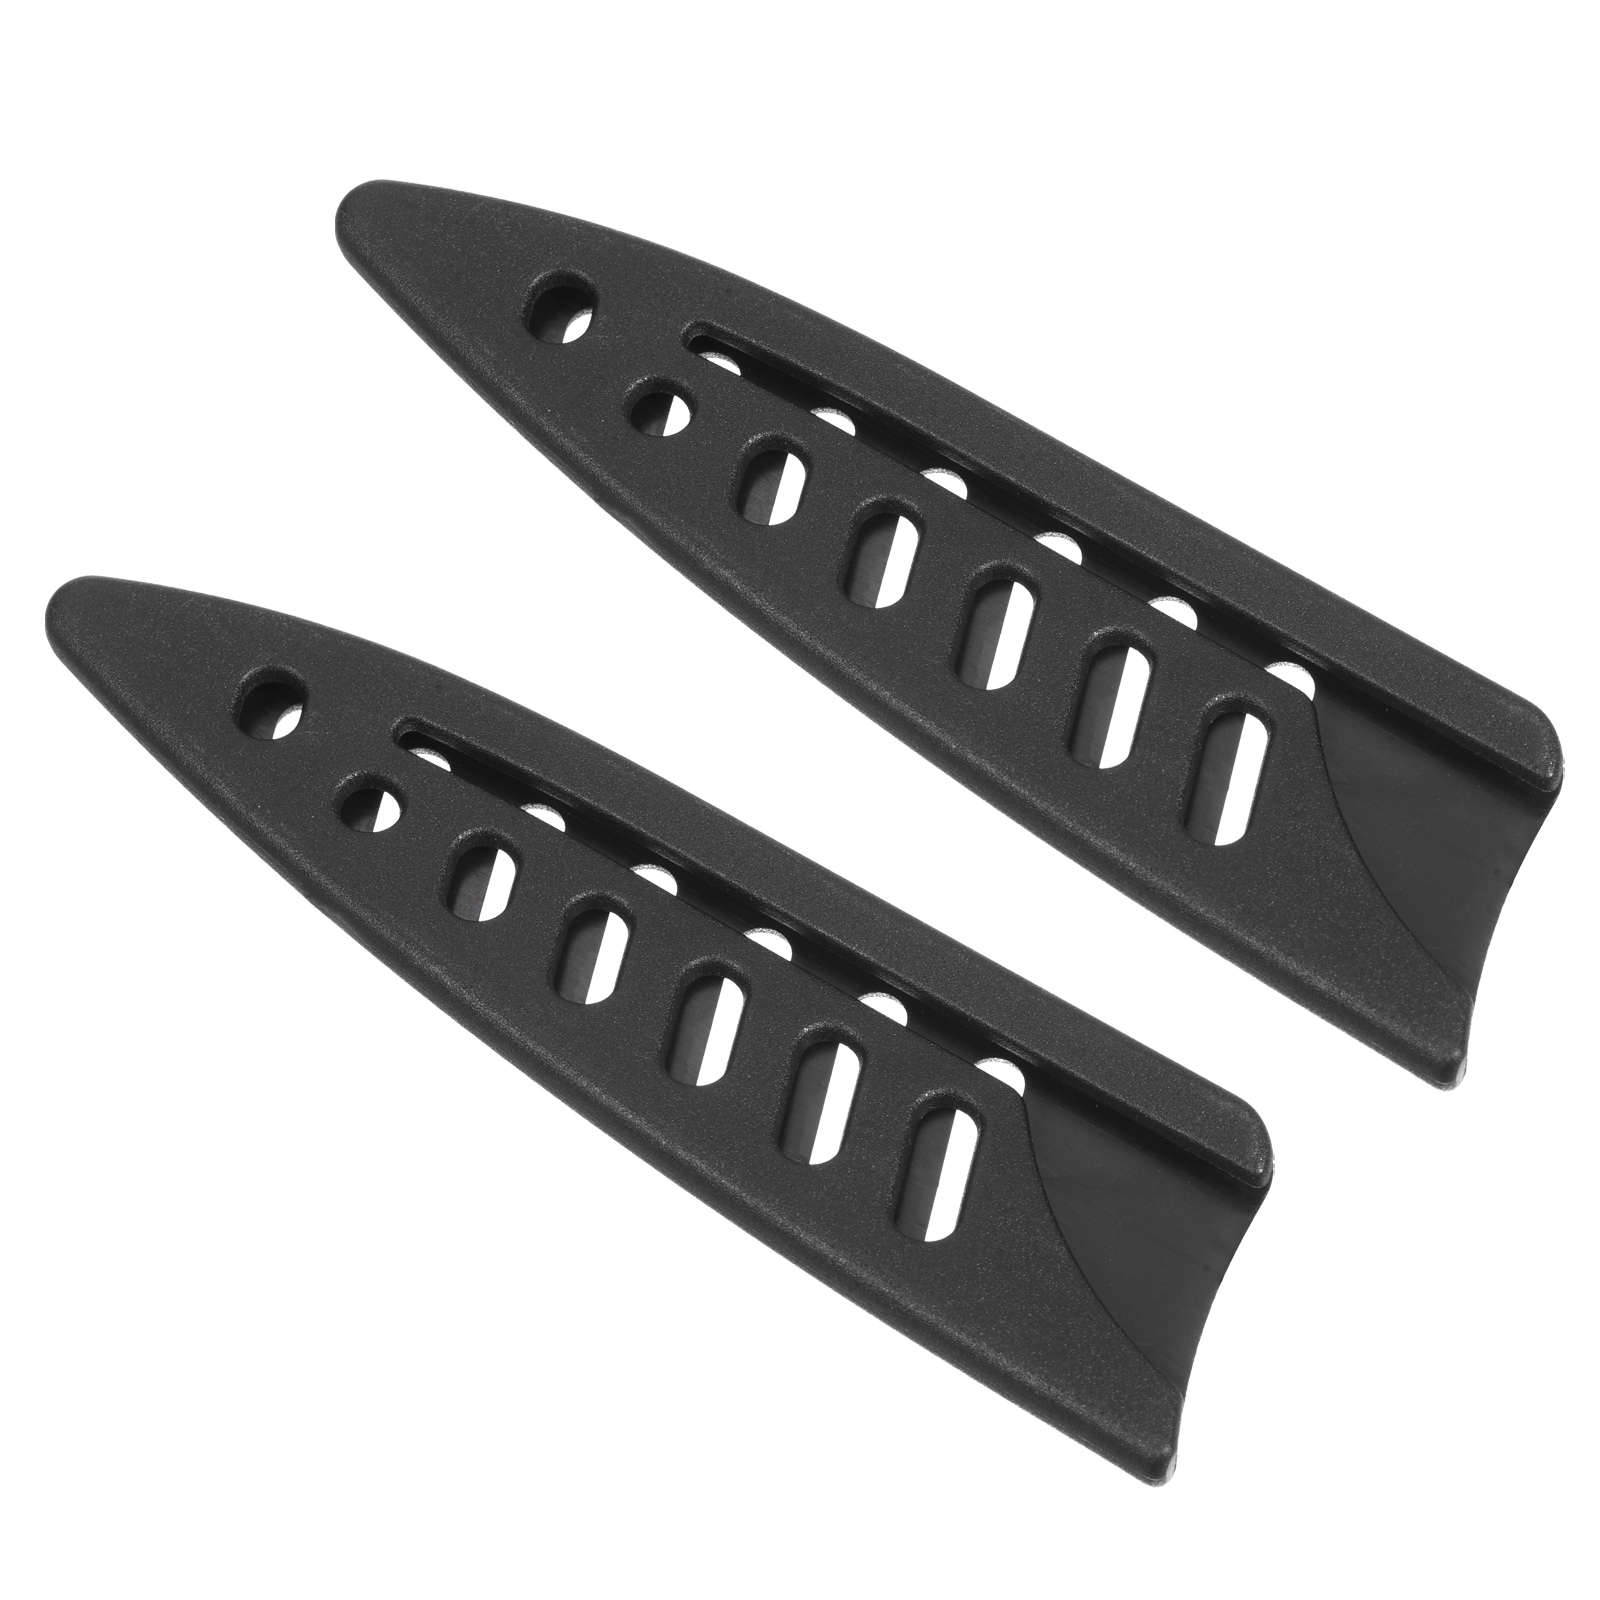 https://ak1.ostkcdn.com/images/products/is/images/direct/dd51f75cdc3303eb6af8b564f87fb0e6bc78117b/PP-Kitchen-Knife-Sheath-Cover-Sleeves-Portable-for-3.5%22-Paring-knife.jpg